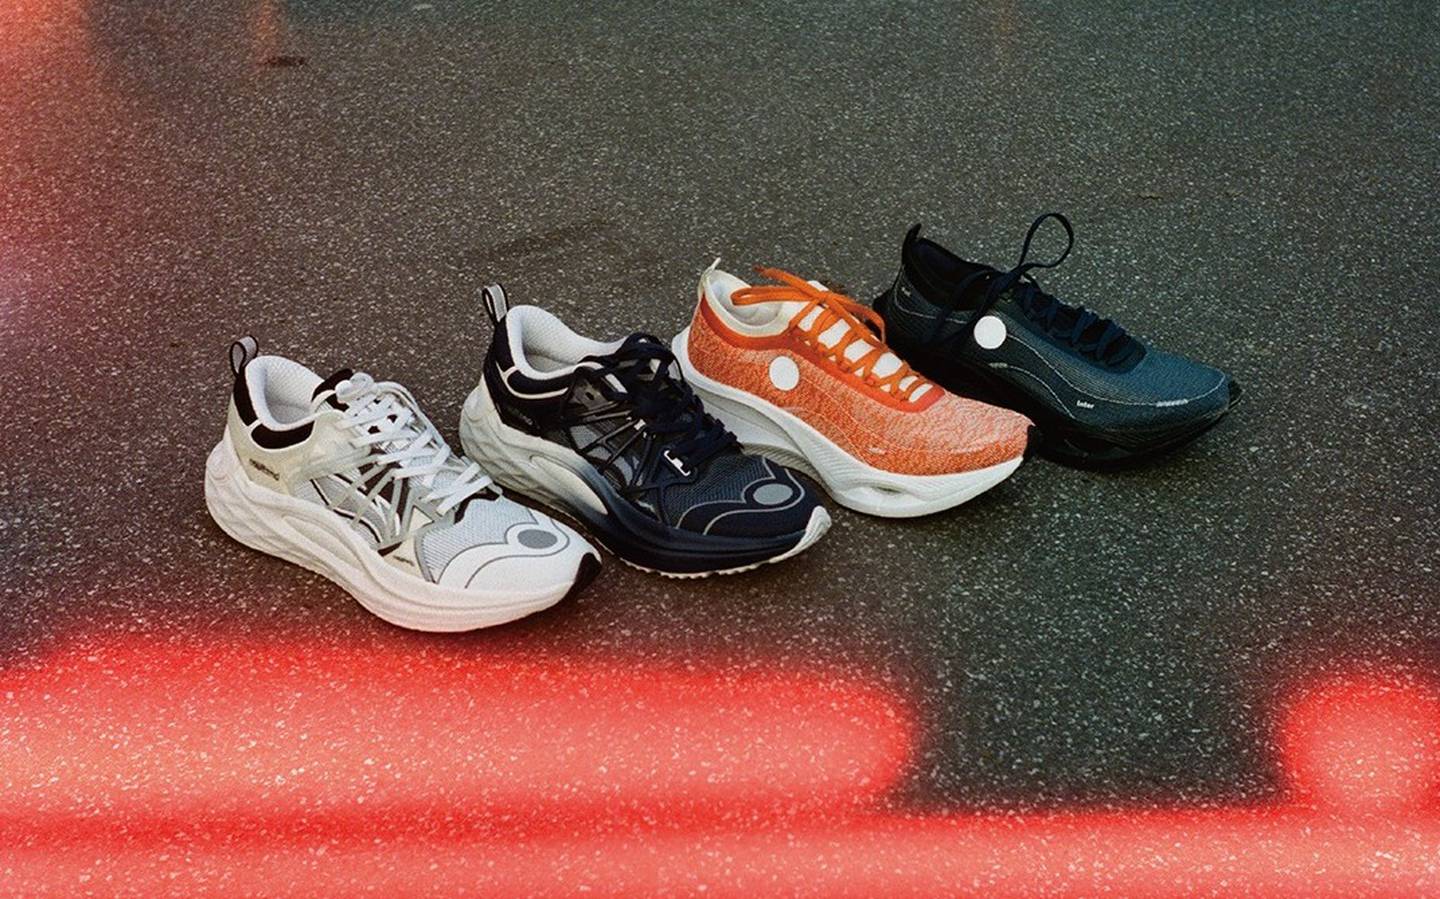 Four different models of shoes by Li-Ning.